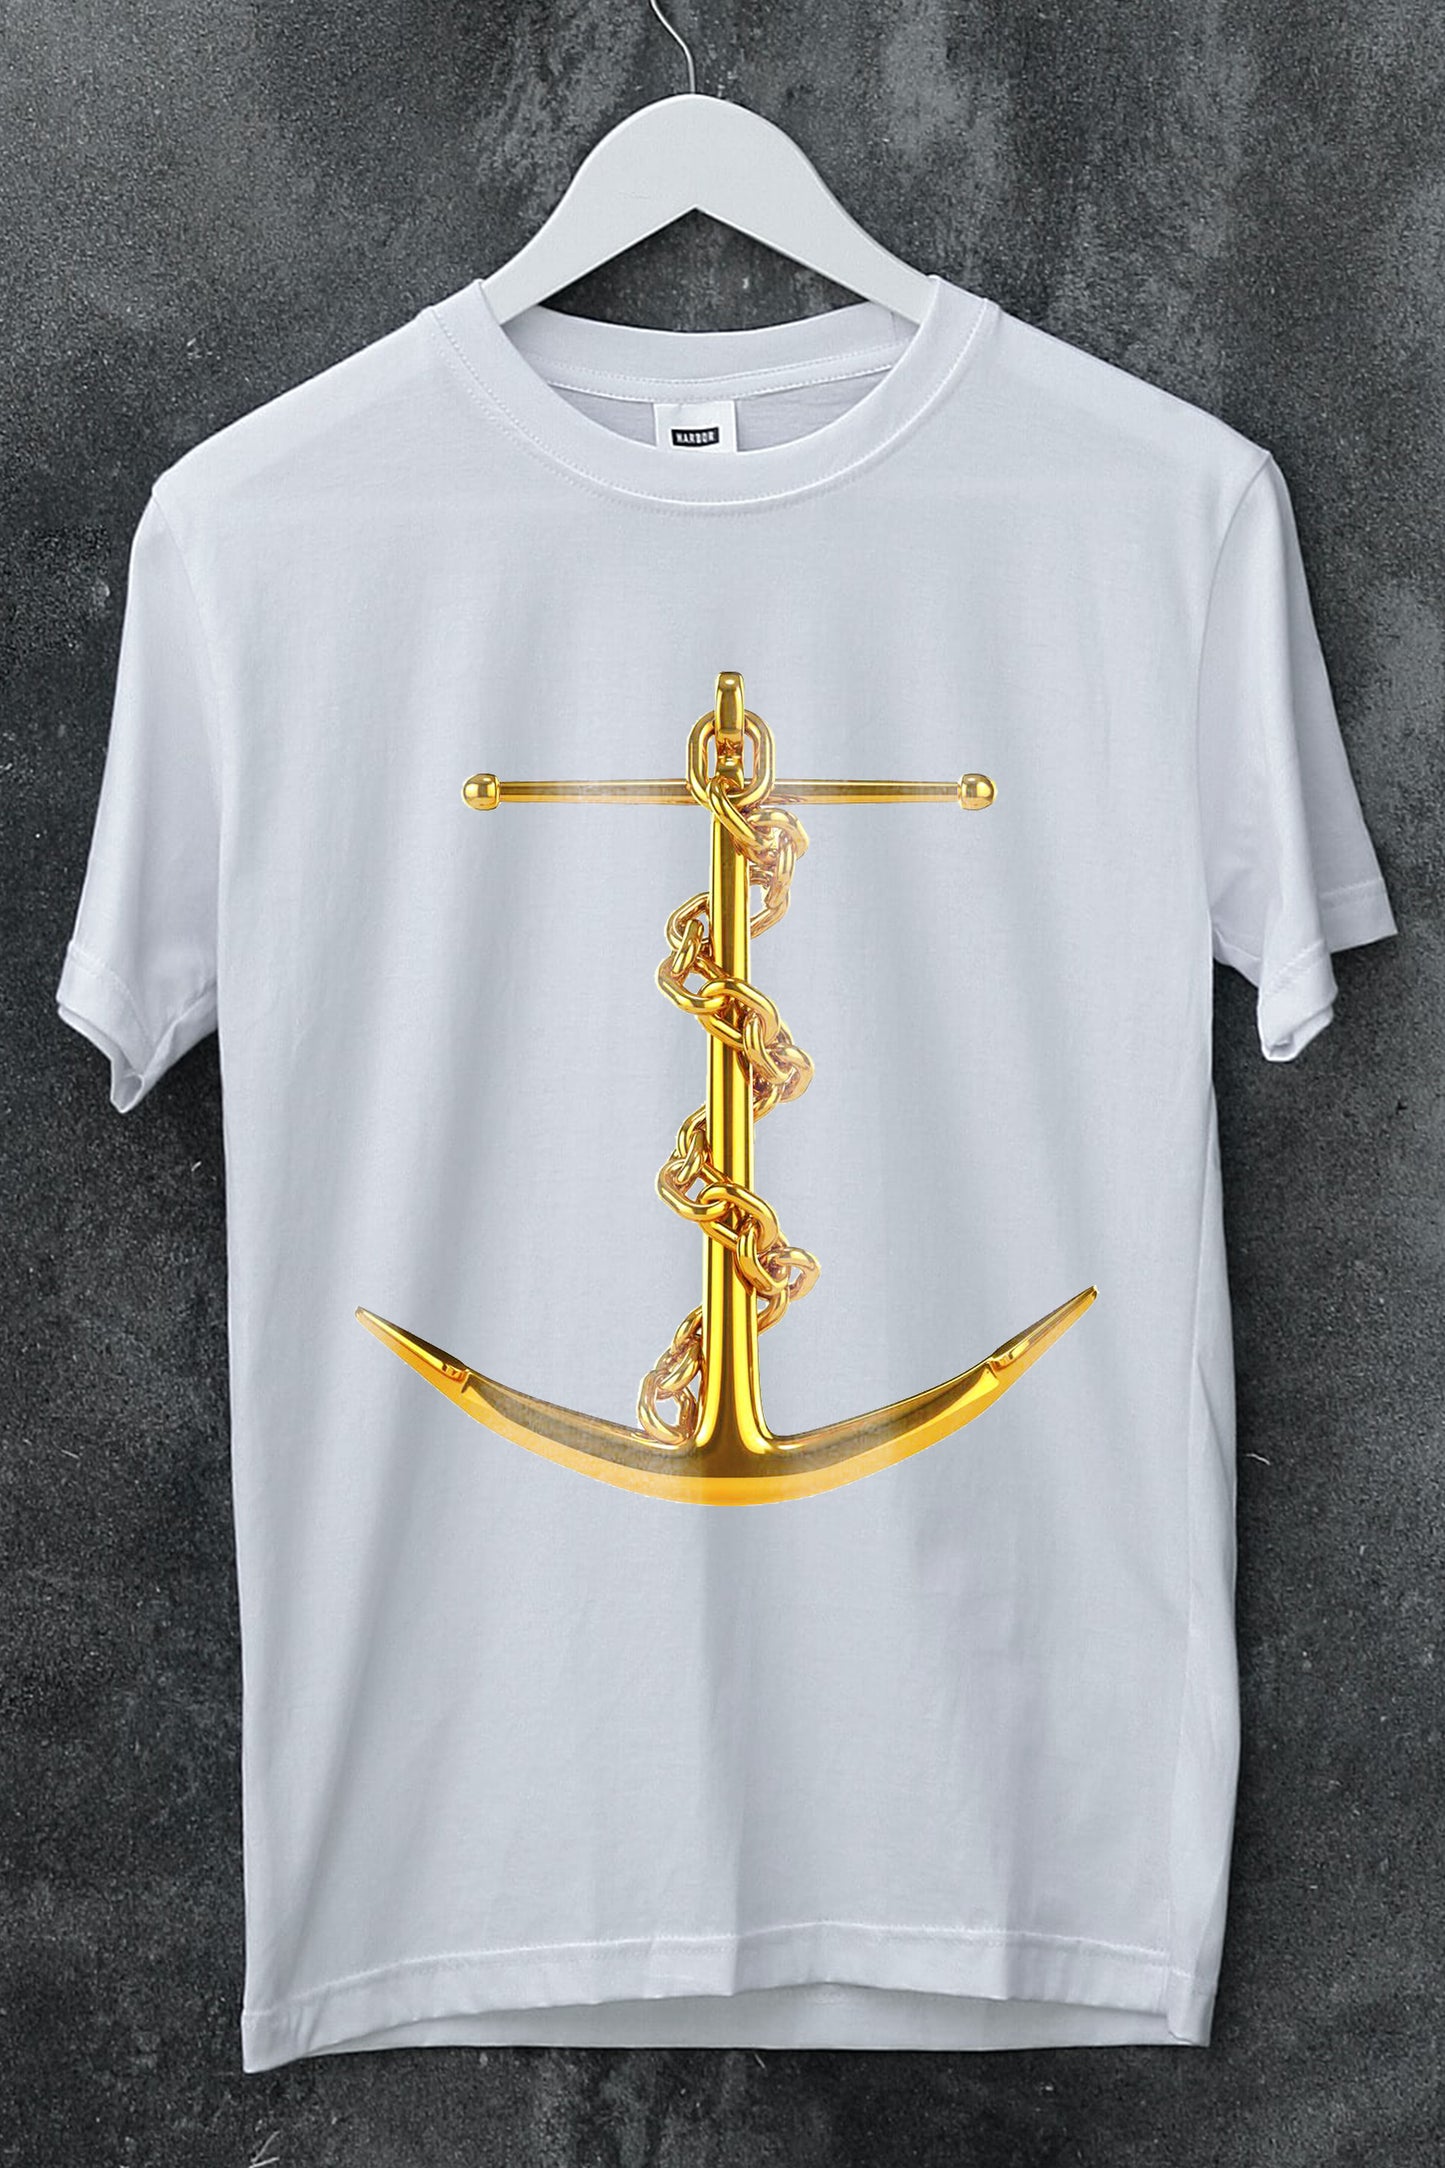 Gold Pirate Anchor T-Shirt / Pirate Streetwear Design - The Official Dealers